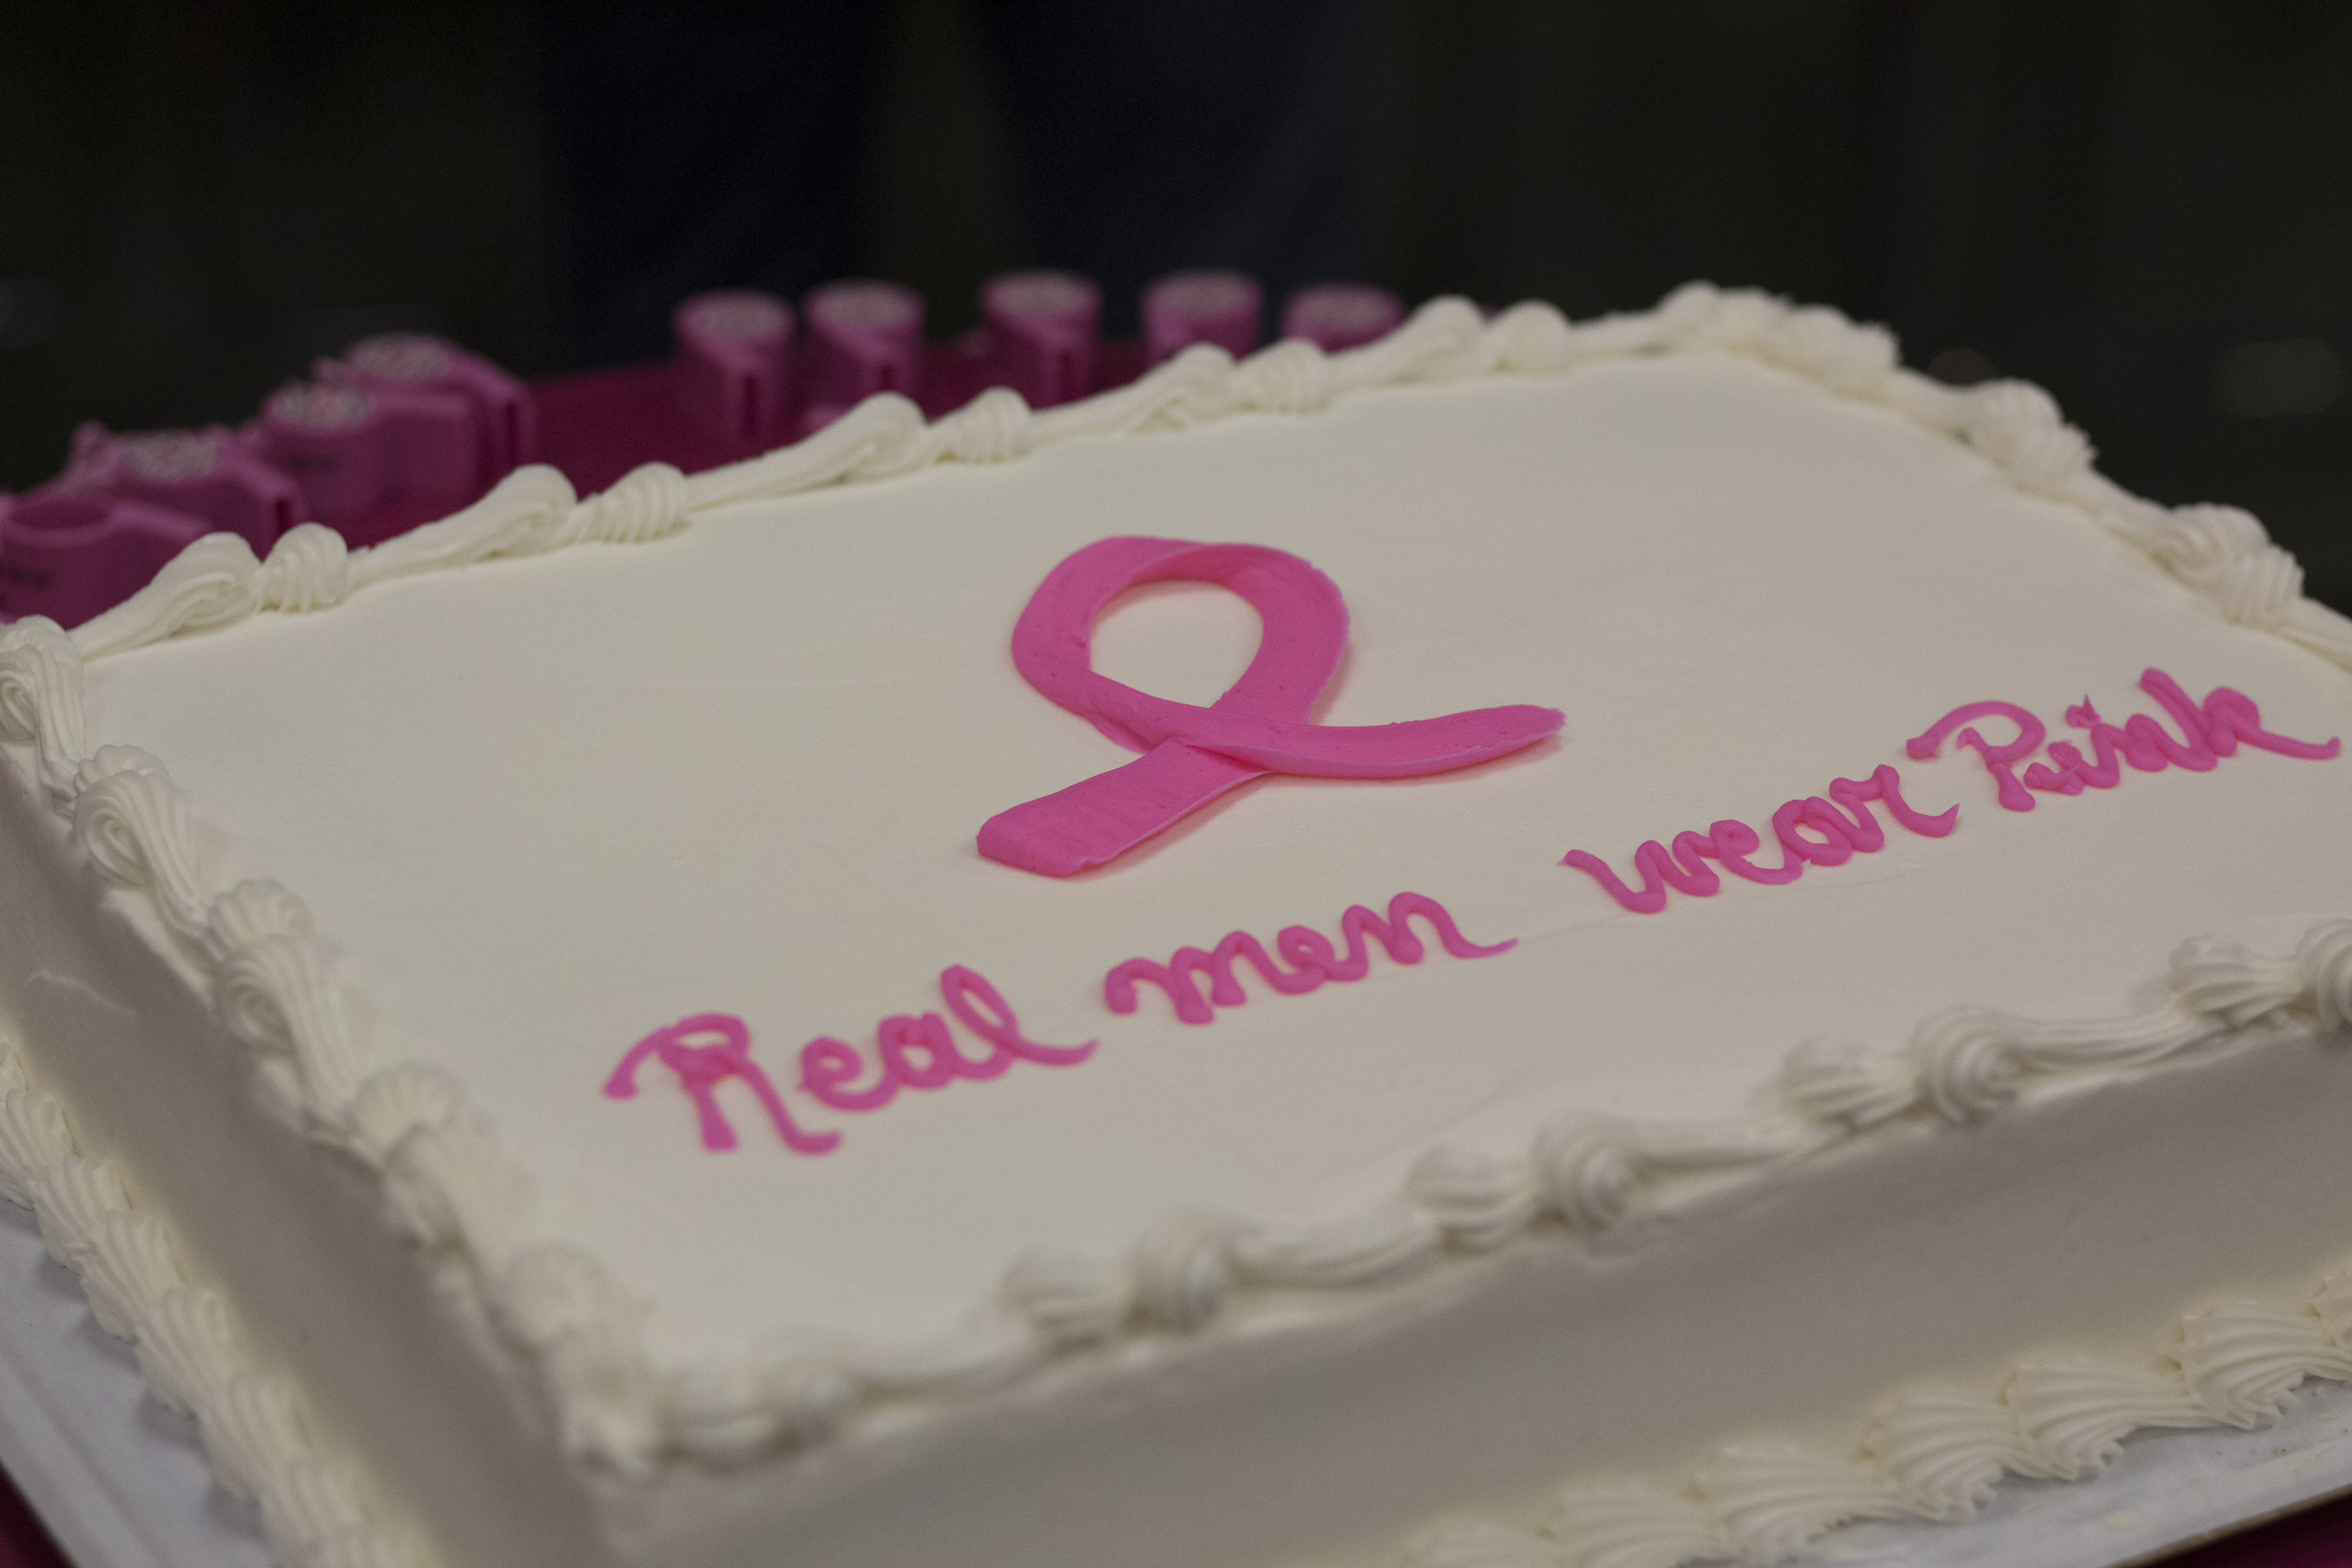 ActioNet informed employees of Breast Cancer Awareness Month at our monthly birthday event. ActioNeters were encouraged to wear pink and were given a speech about breast cancer detection before eating some cake.